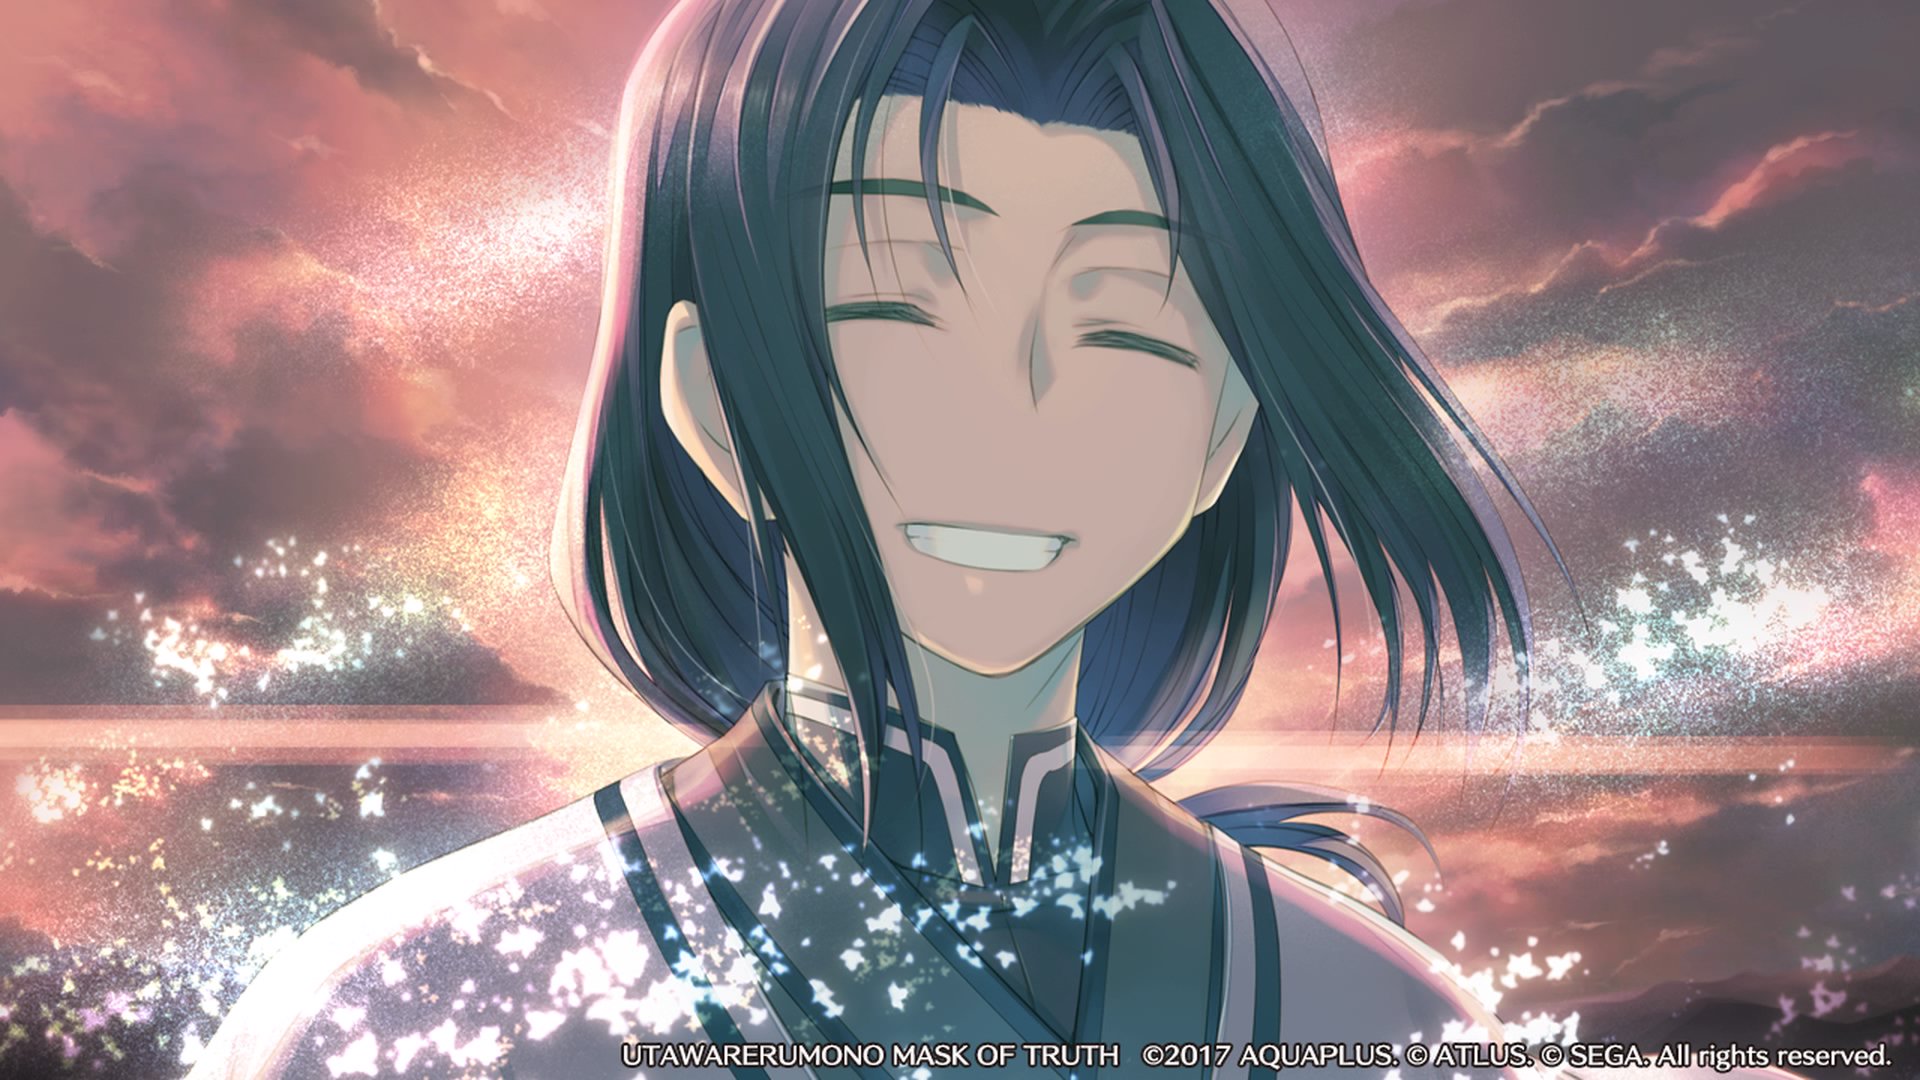 J The1eyedgamer Just Finished Utawarerumono Mot I Can Say This This Game Was An Amazing Great Characters Great World Fun Gameplay Amazing Music I Am So Glad This